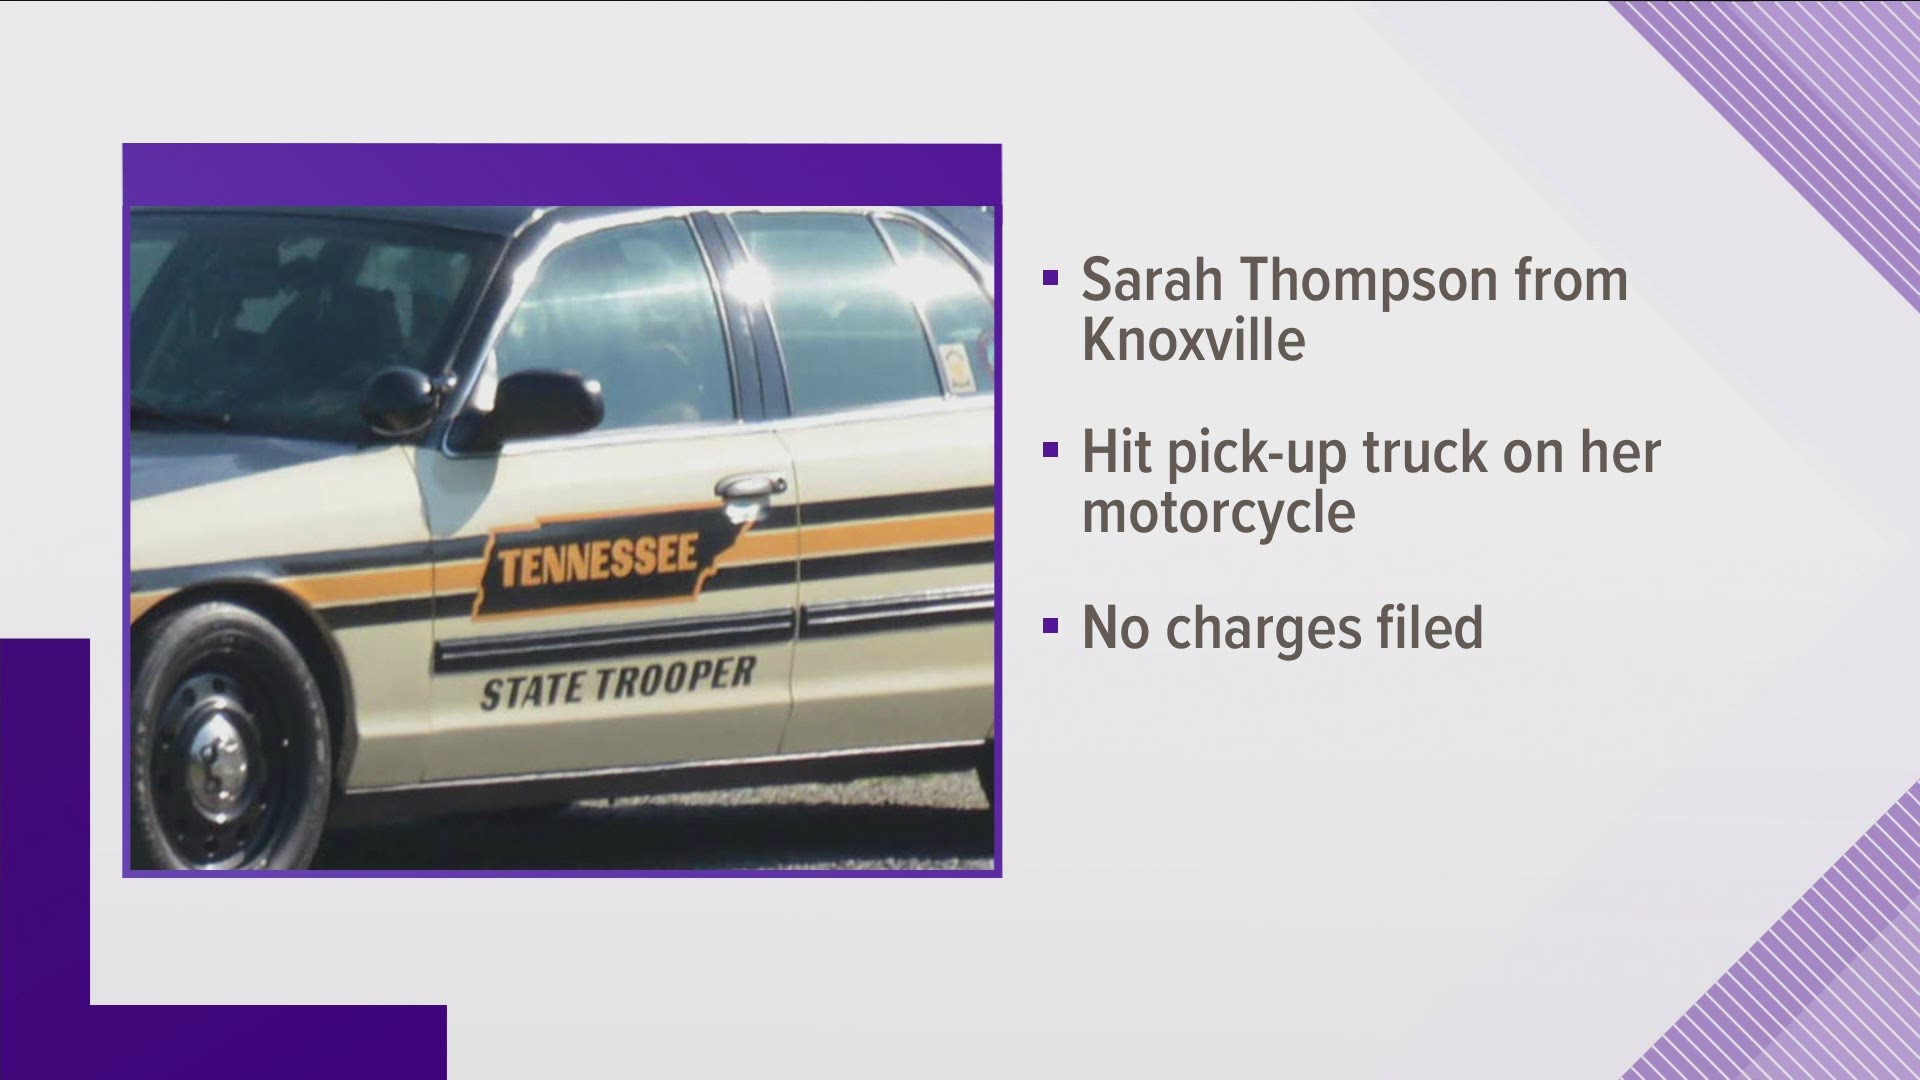 THP says Sarah Thompson crossed over the double yellow lines on her motorcycle and hit a pick-up truck.